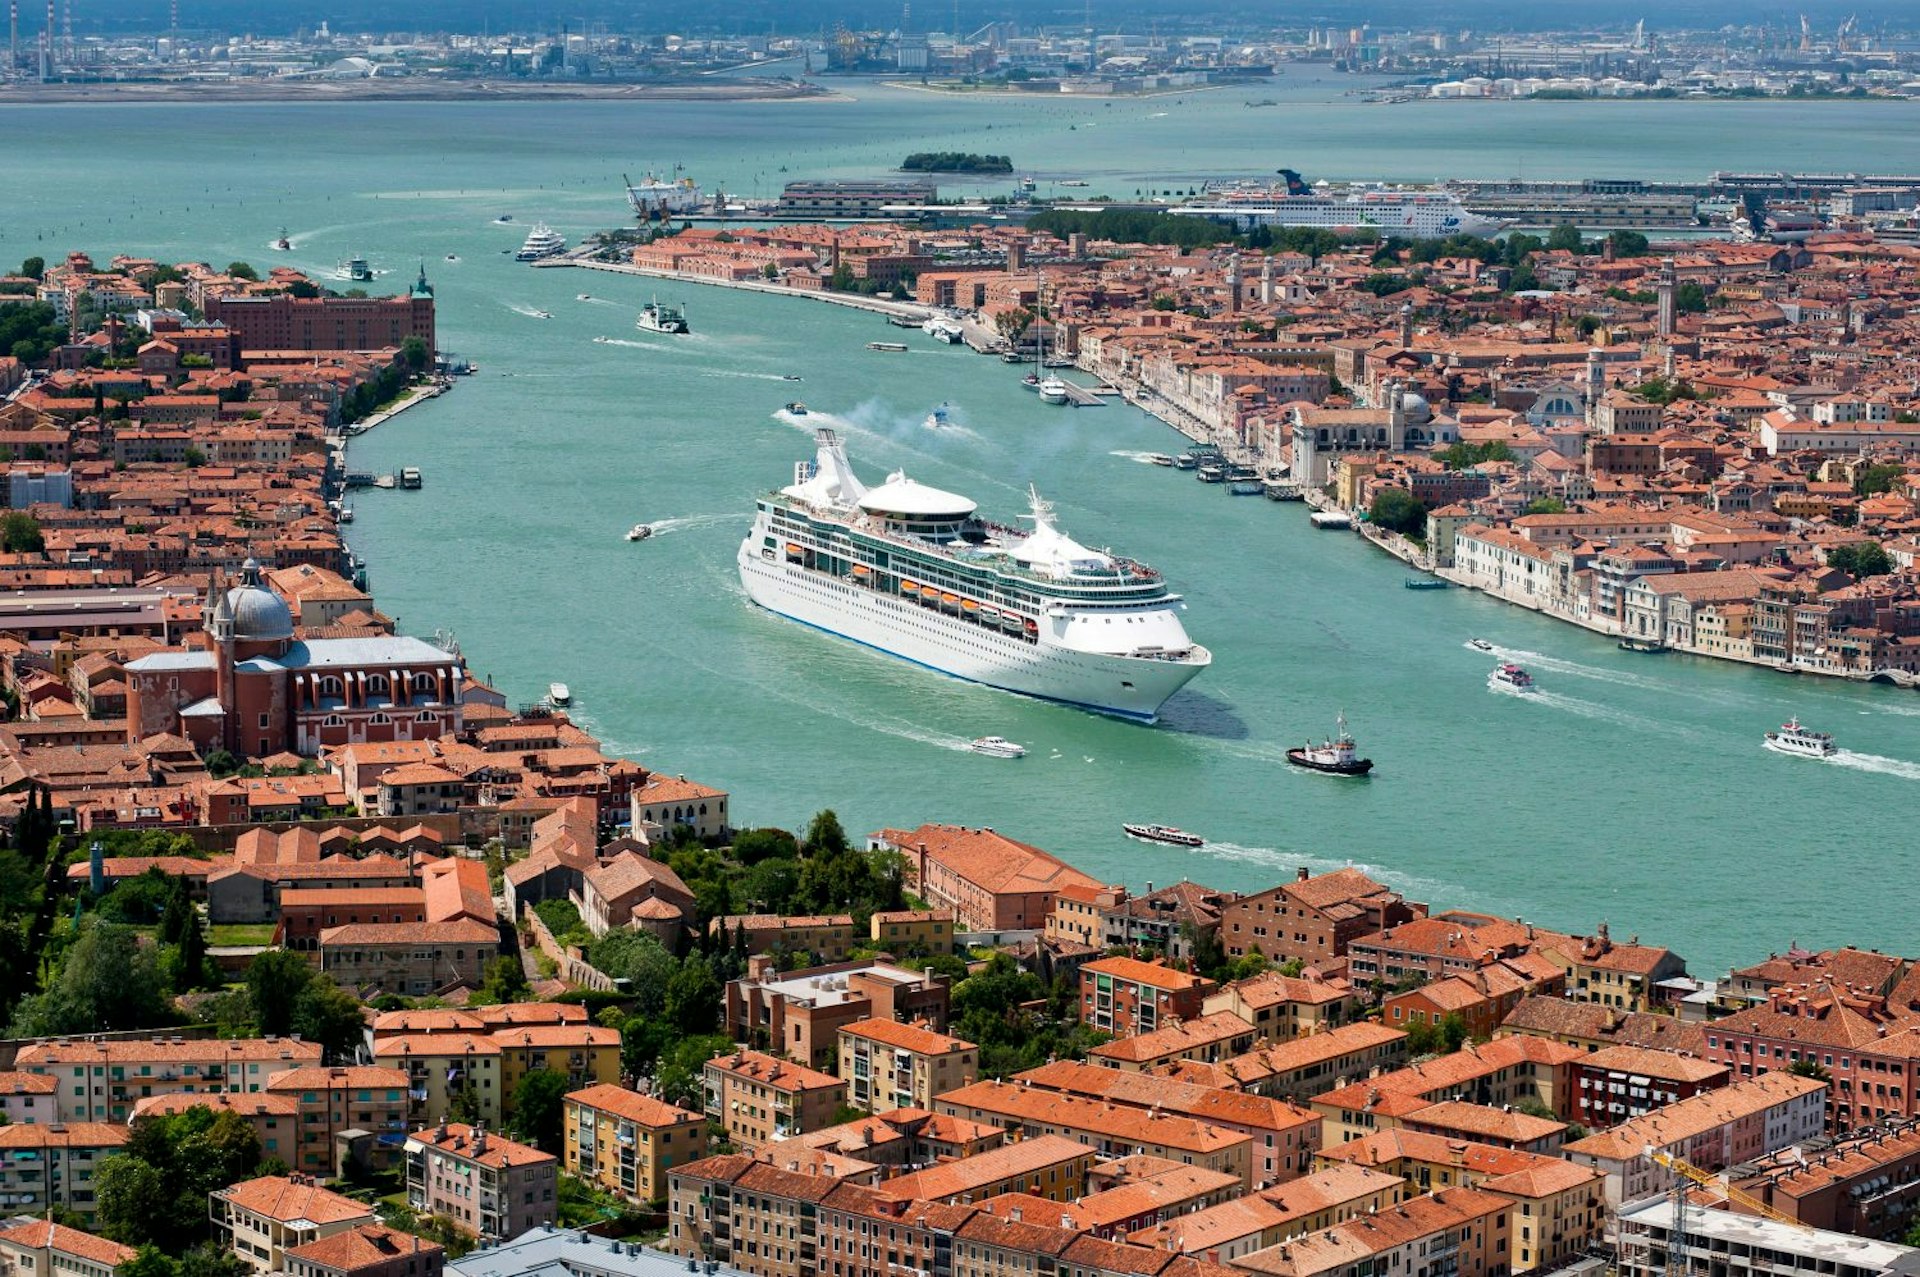 A cruise ship crossing the Grand Canal in Venice, Italy